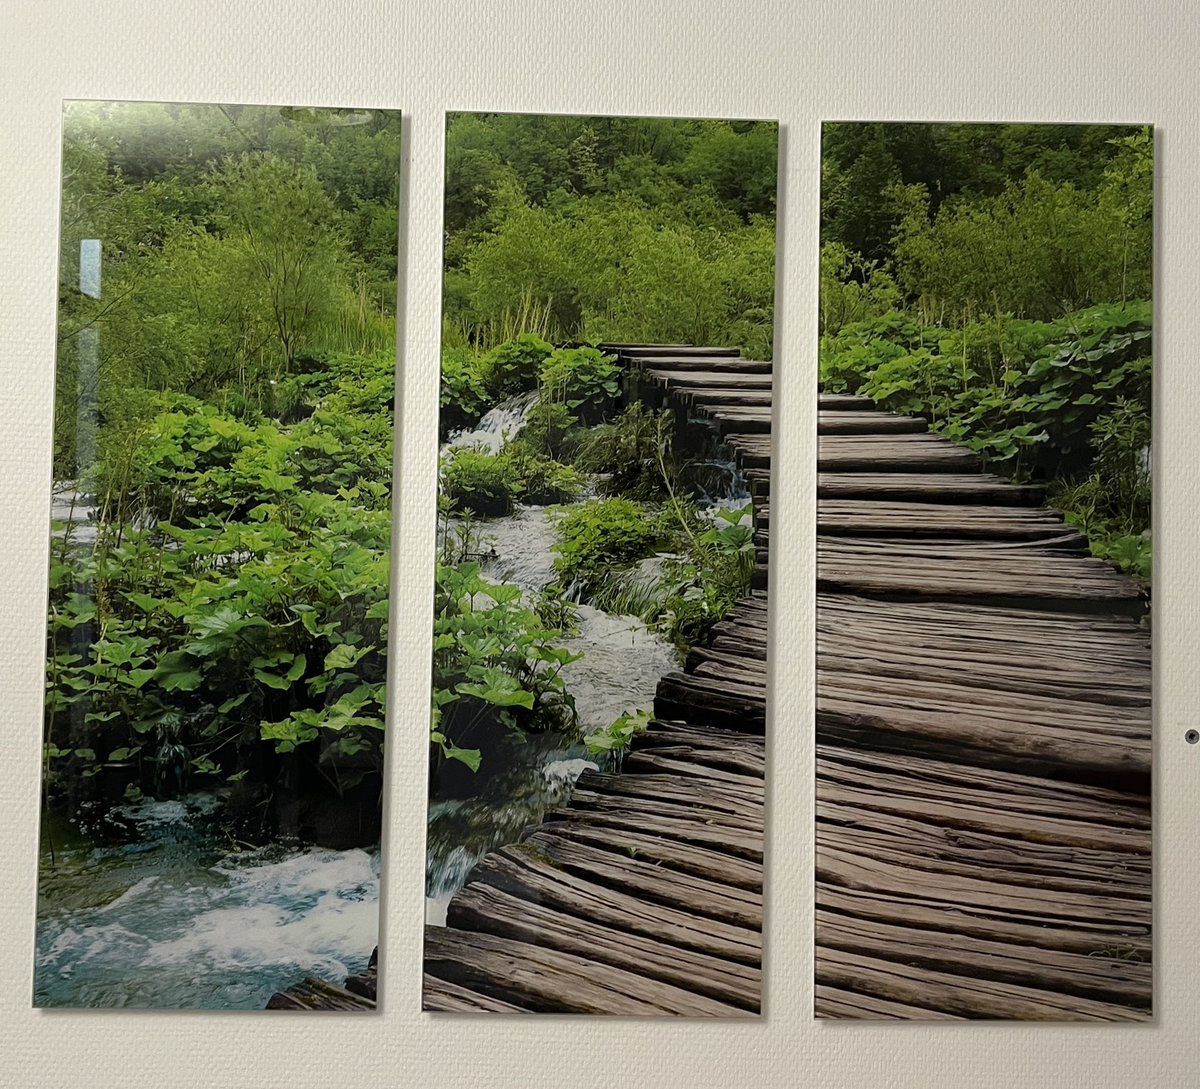 On this #WetlandsWednesday I was in the hospital waiting room for my daughters review and voila - pictures of wetlands on the walls 👏🏽🙌🏽🙏🏾🤩👇🏾 #NyonHospital Because wetlands are calming 🙏🏾💪🏽😊 @RamsarConv